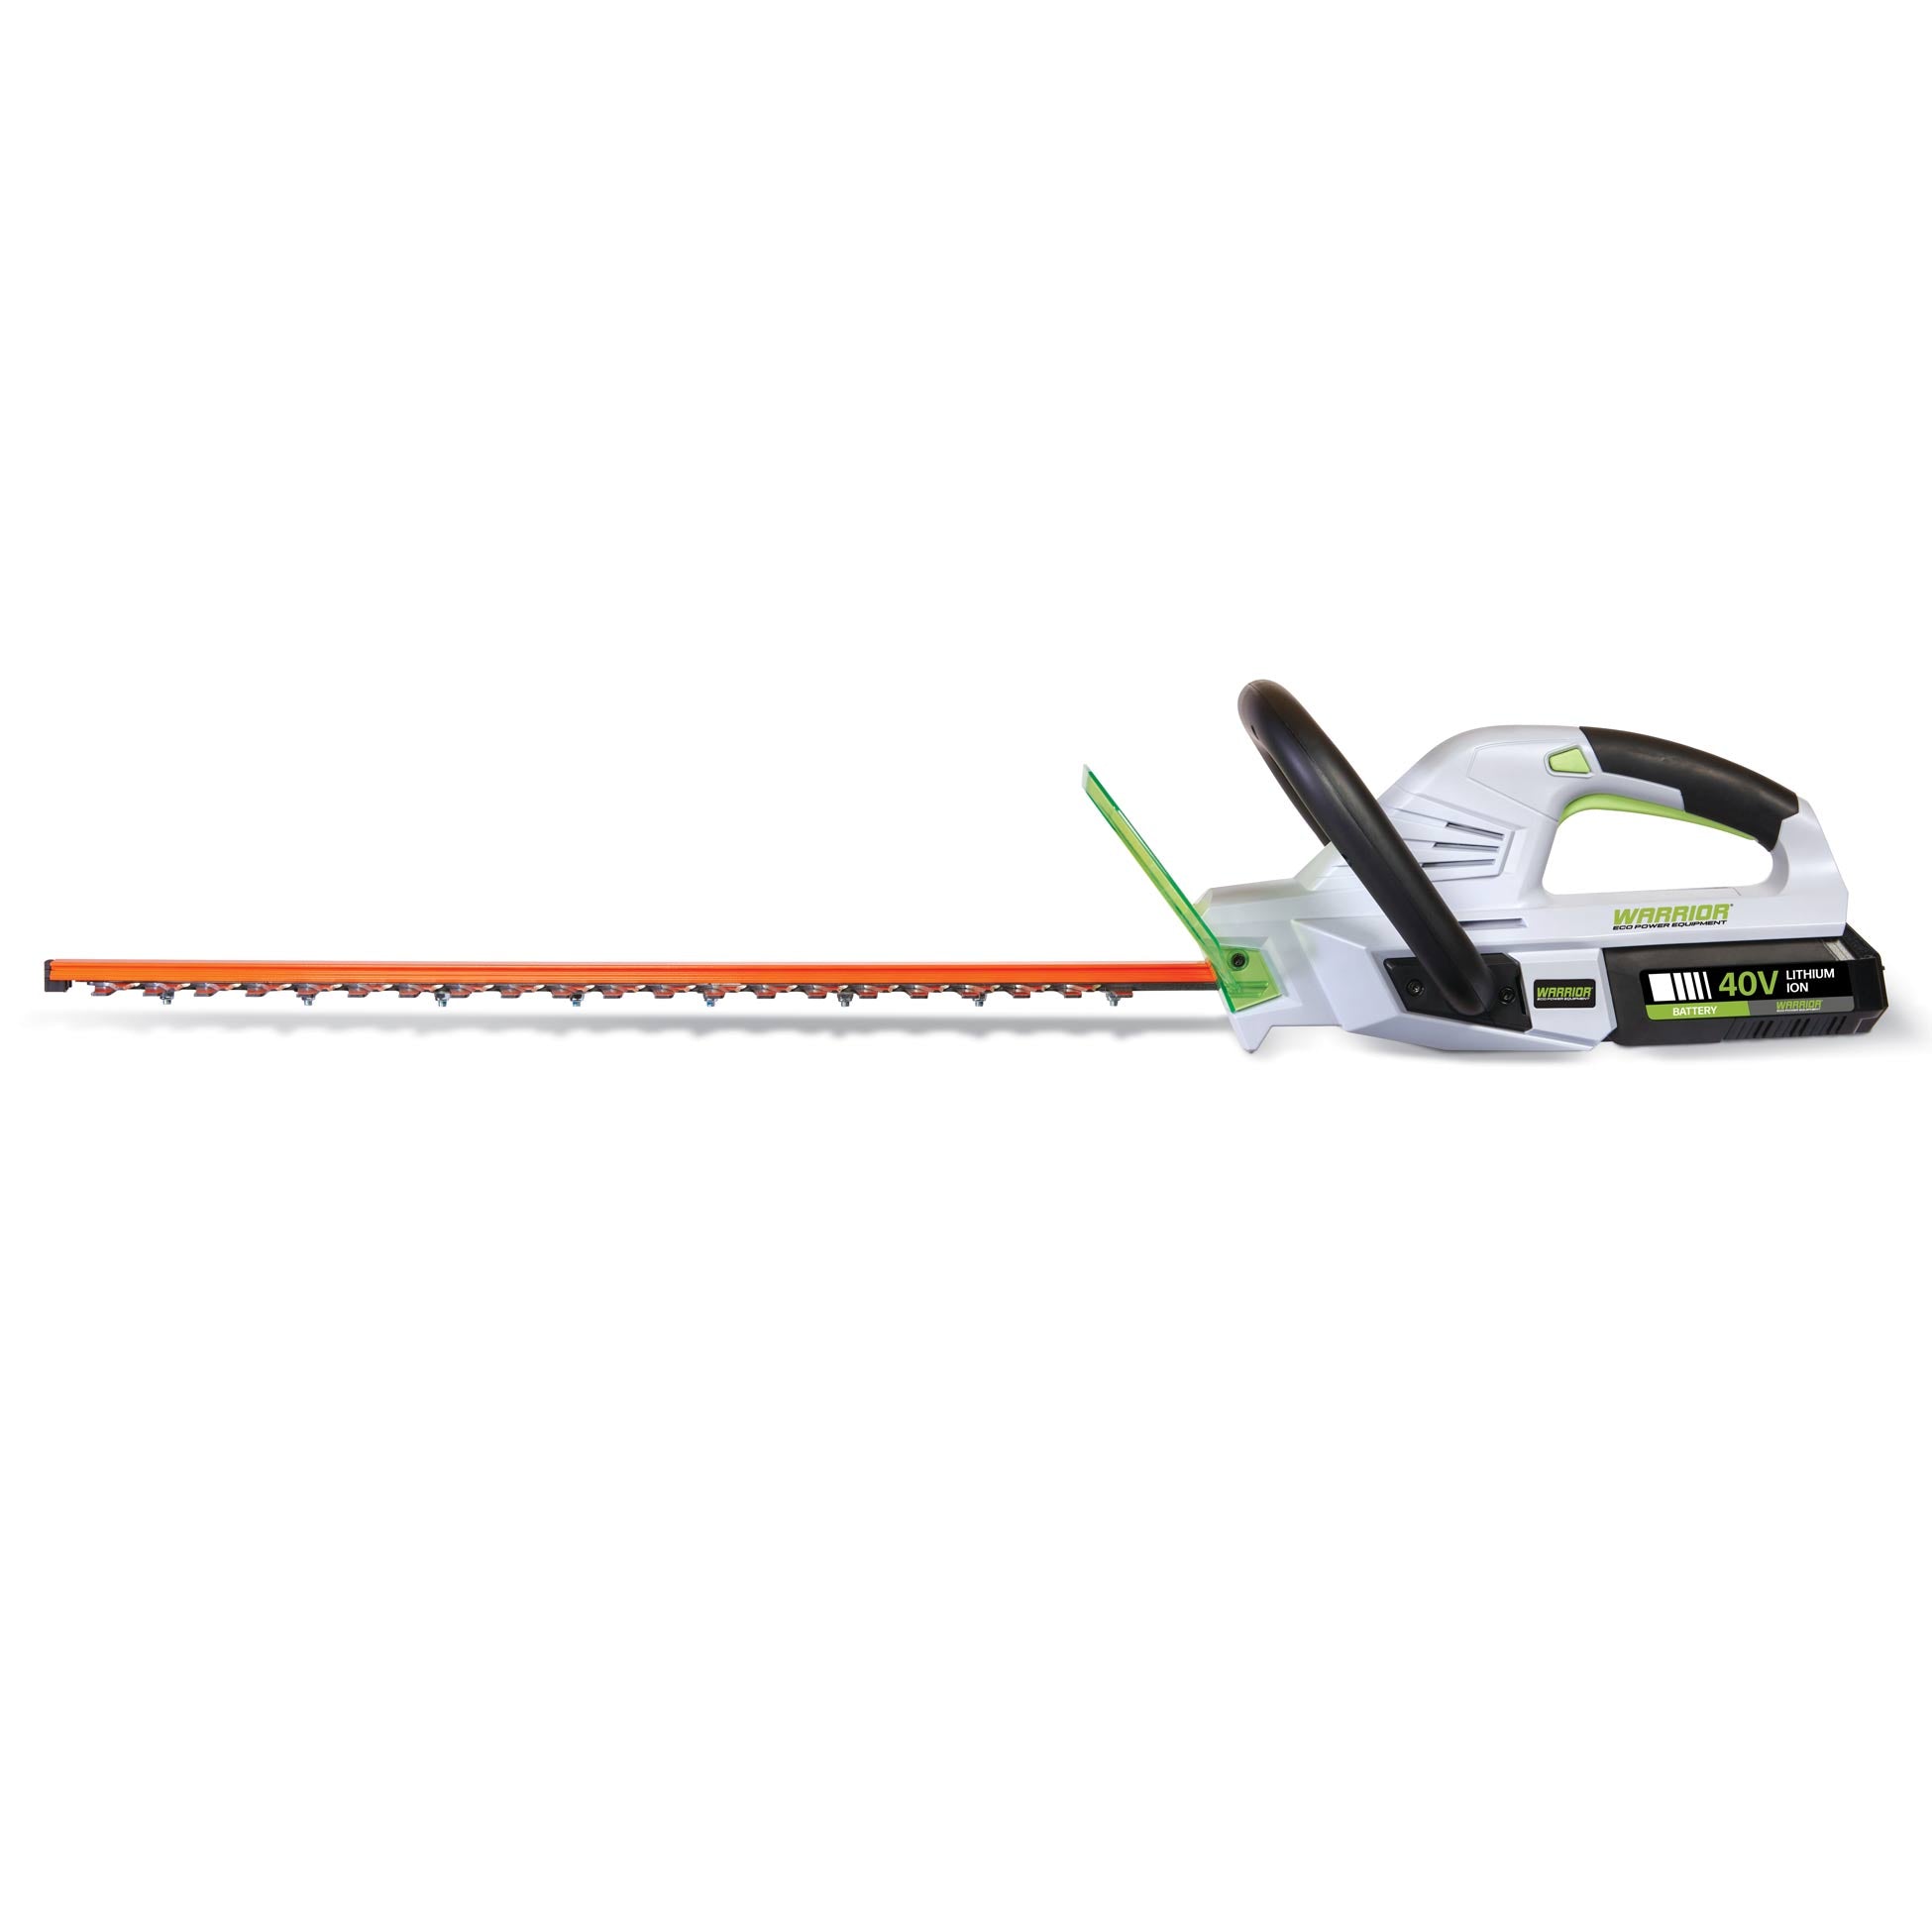 Overview of Warrior Eco Power Equipment 40v Cordless Hedge Trimmer